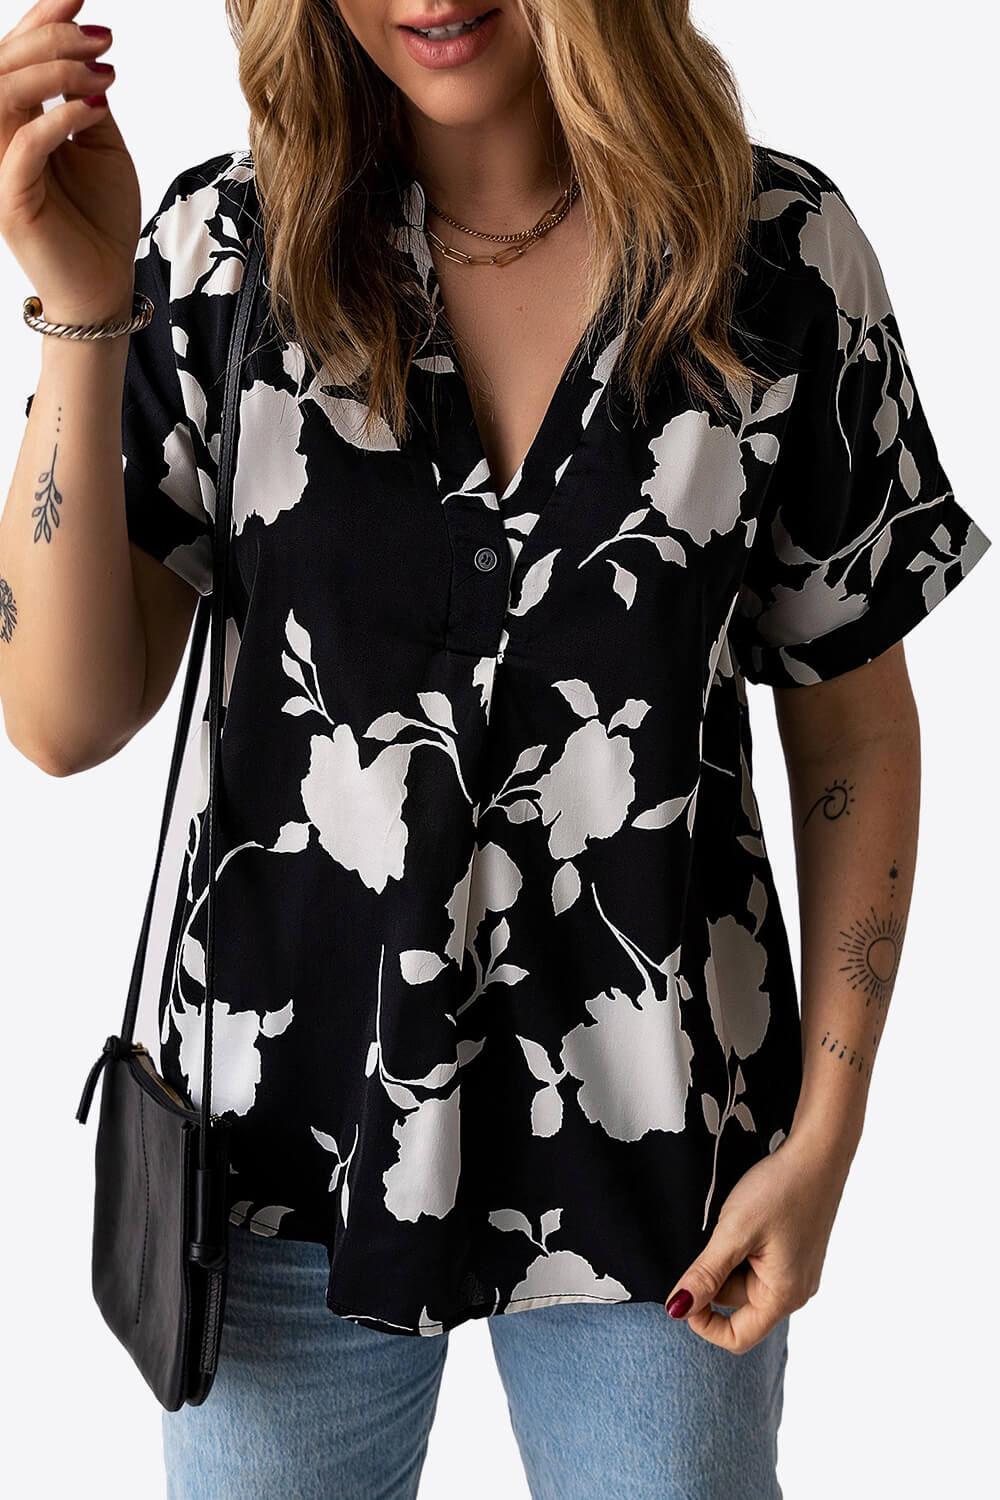 Women’s Floral Notched Neck Cuffed Short Sleeve Blouse